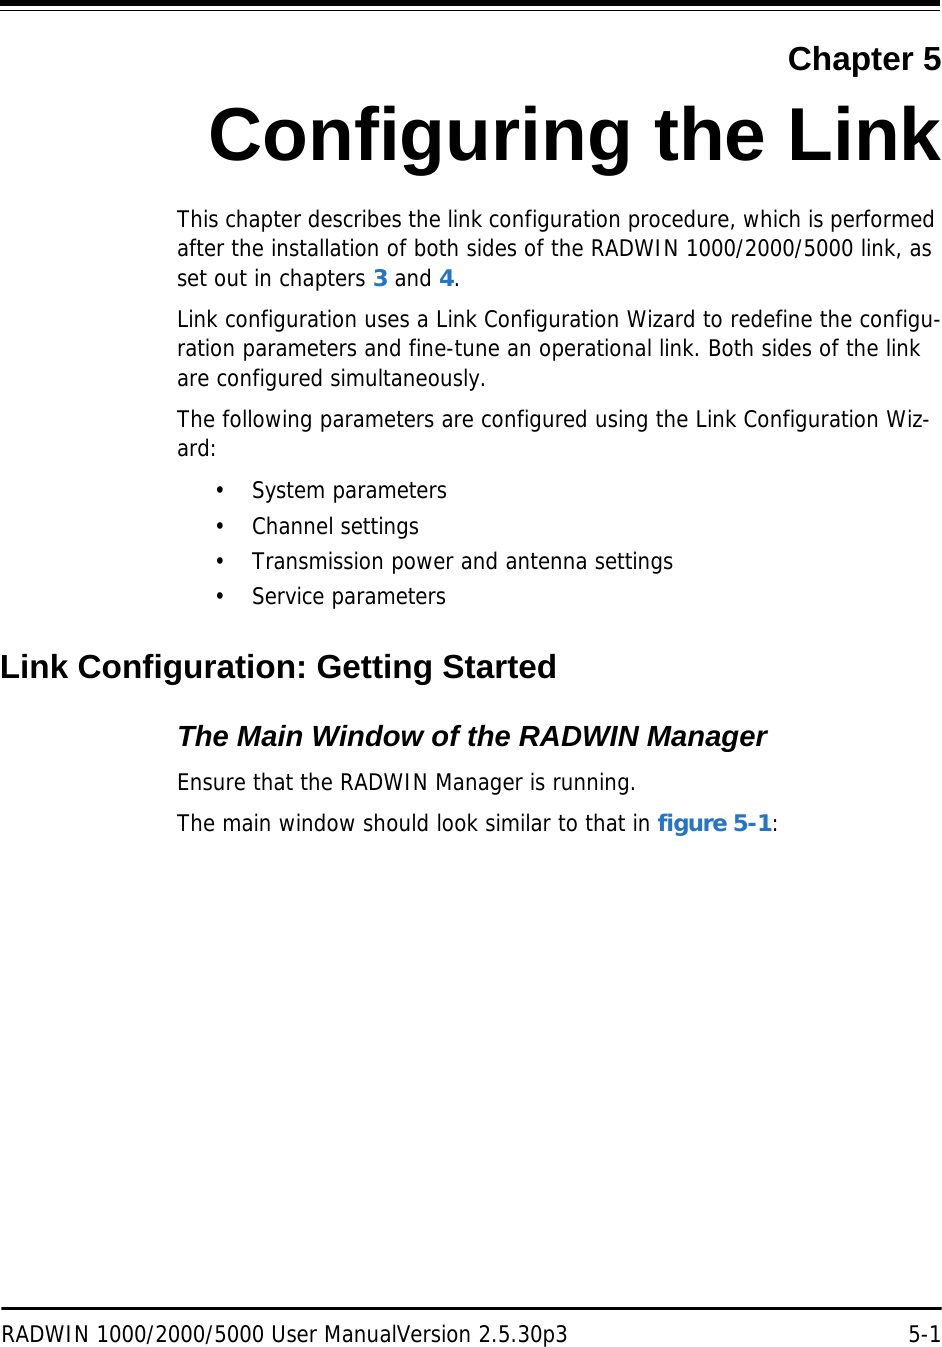 RADWIN 1000/2000/5000 User ManualVersion 2.5.30p3 5-1Chapter 5Configuring the LinkThis chapter describes the link configuration procedure, which is performed after the installation of both sides of the RADWIN 1000/2000/5000 link, as set out in chapters 3 and 4.Link configuration uses a Link Configuration Wizard to redefine the configu-ration parameters and fine-tune an operational link. Both sides of the link are configured simultaneously.The following parameters are configured using the Link Configuration Wiz-ard:• System parameters• Channel settings• Transmission power and antenna settings• Service parametersLink Configuration: Getting StartedThe Main Window of the RADWIN ManagerEnsure that the RADWIN Manager is running.The main window should look similar to that in figure 5-1: